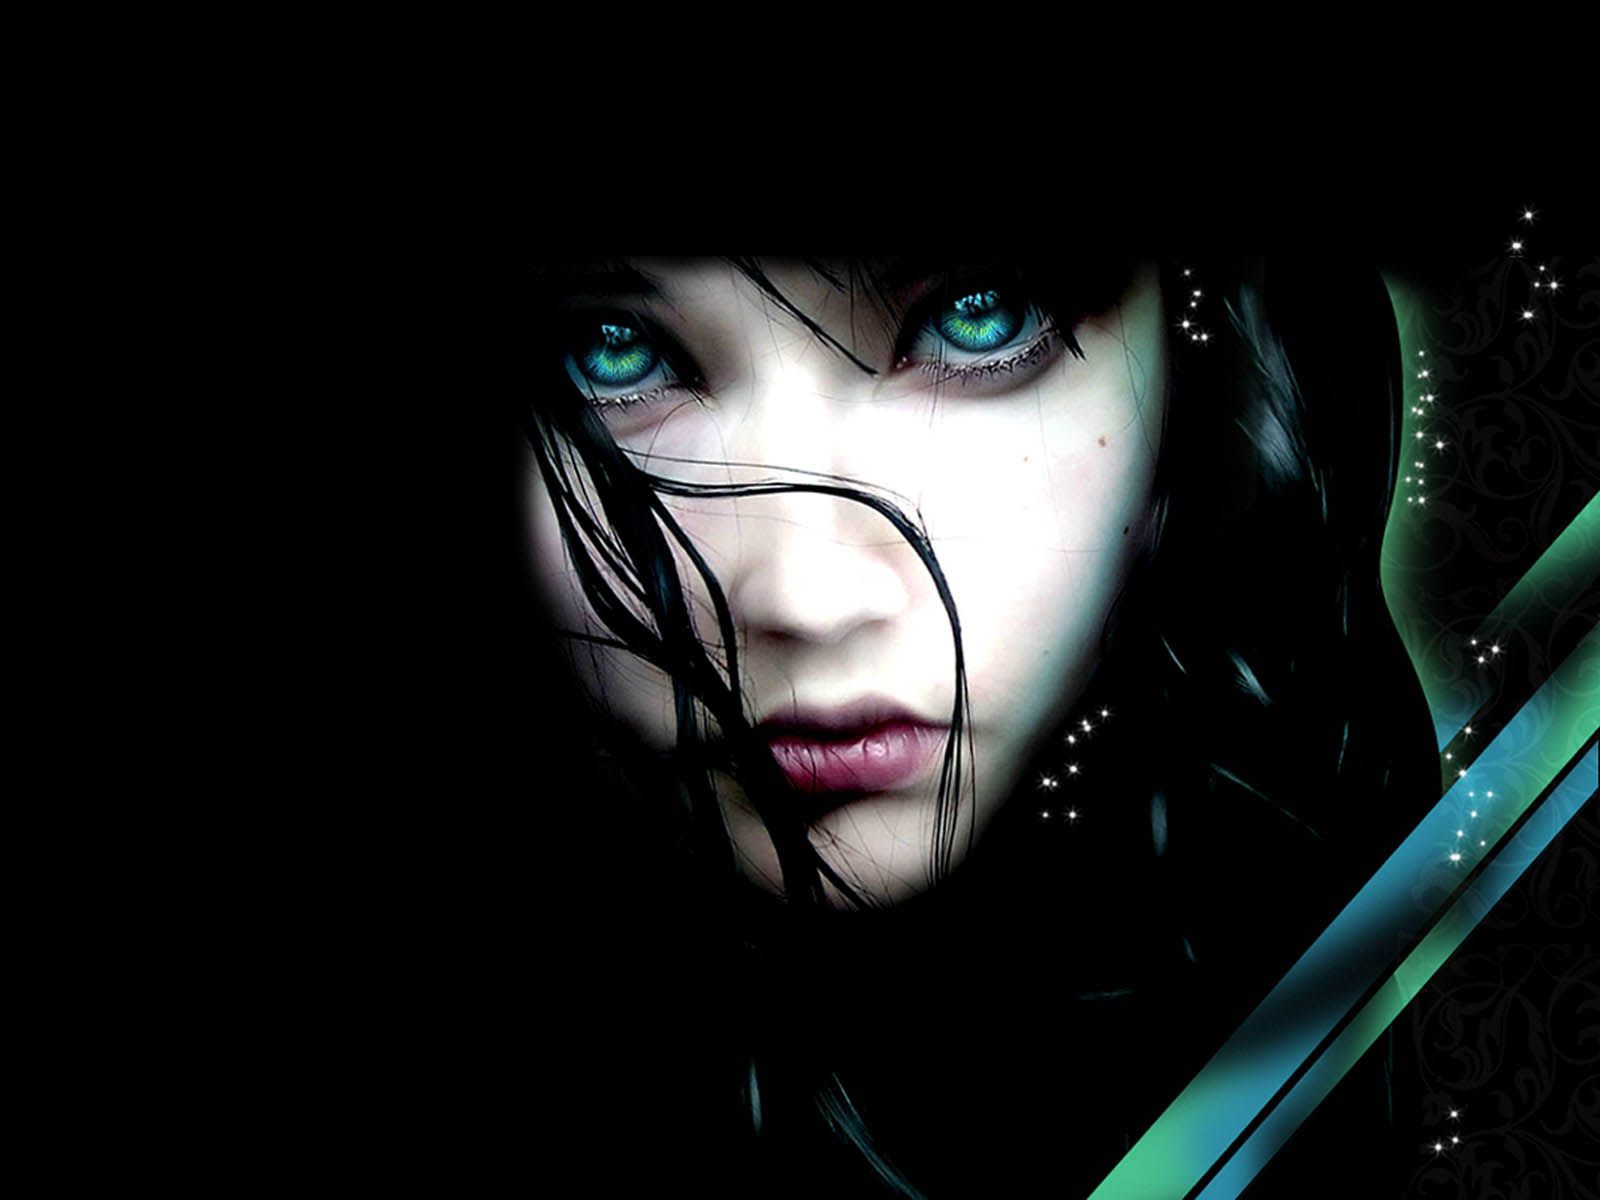 Emo GIrl Latest HD Wallpapers Free Download New HD Wallpapers